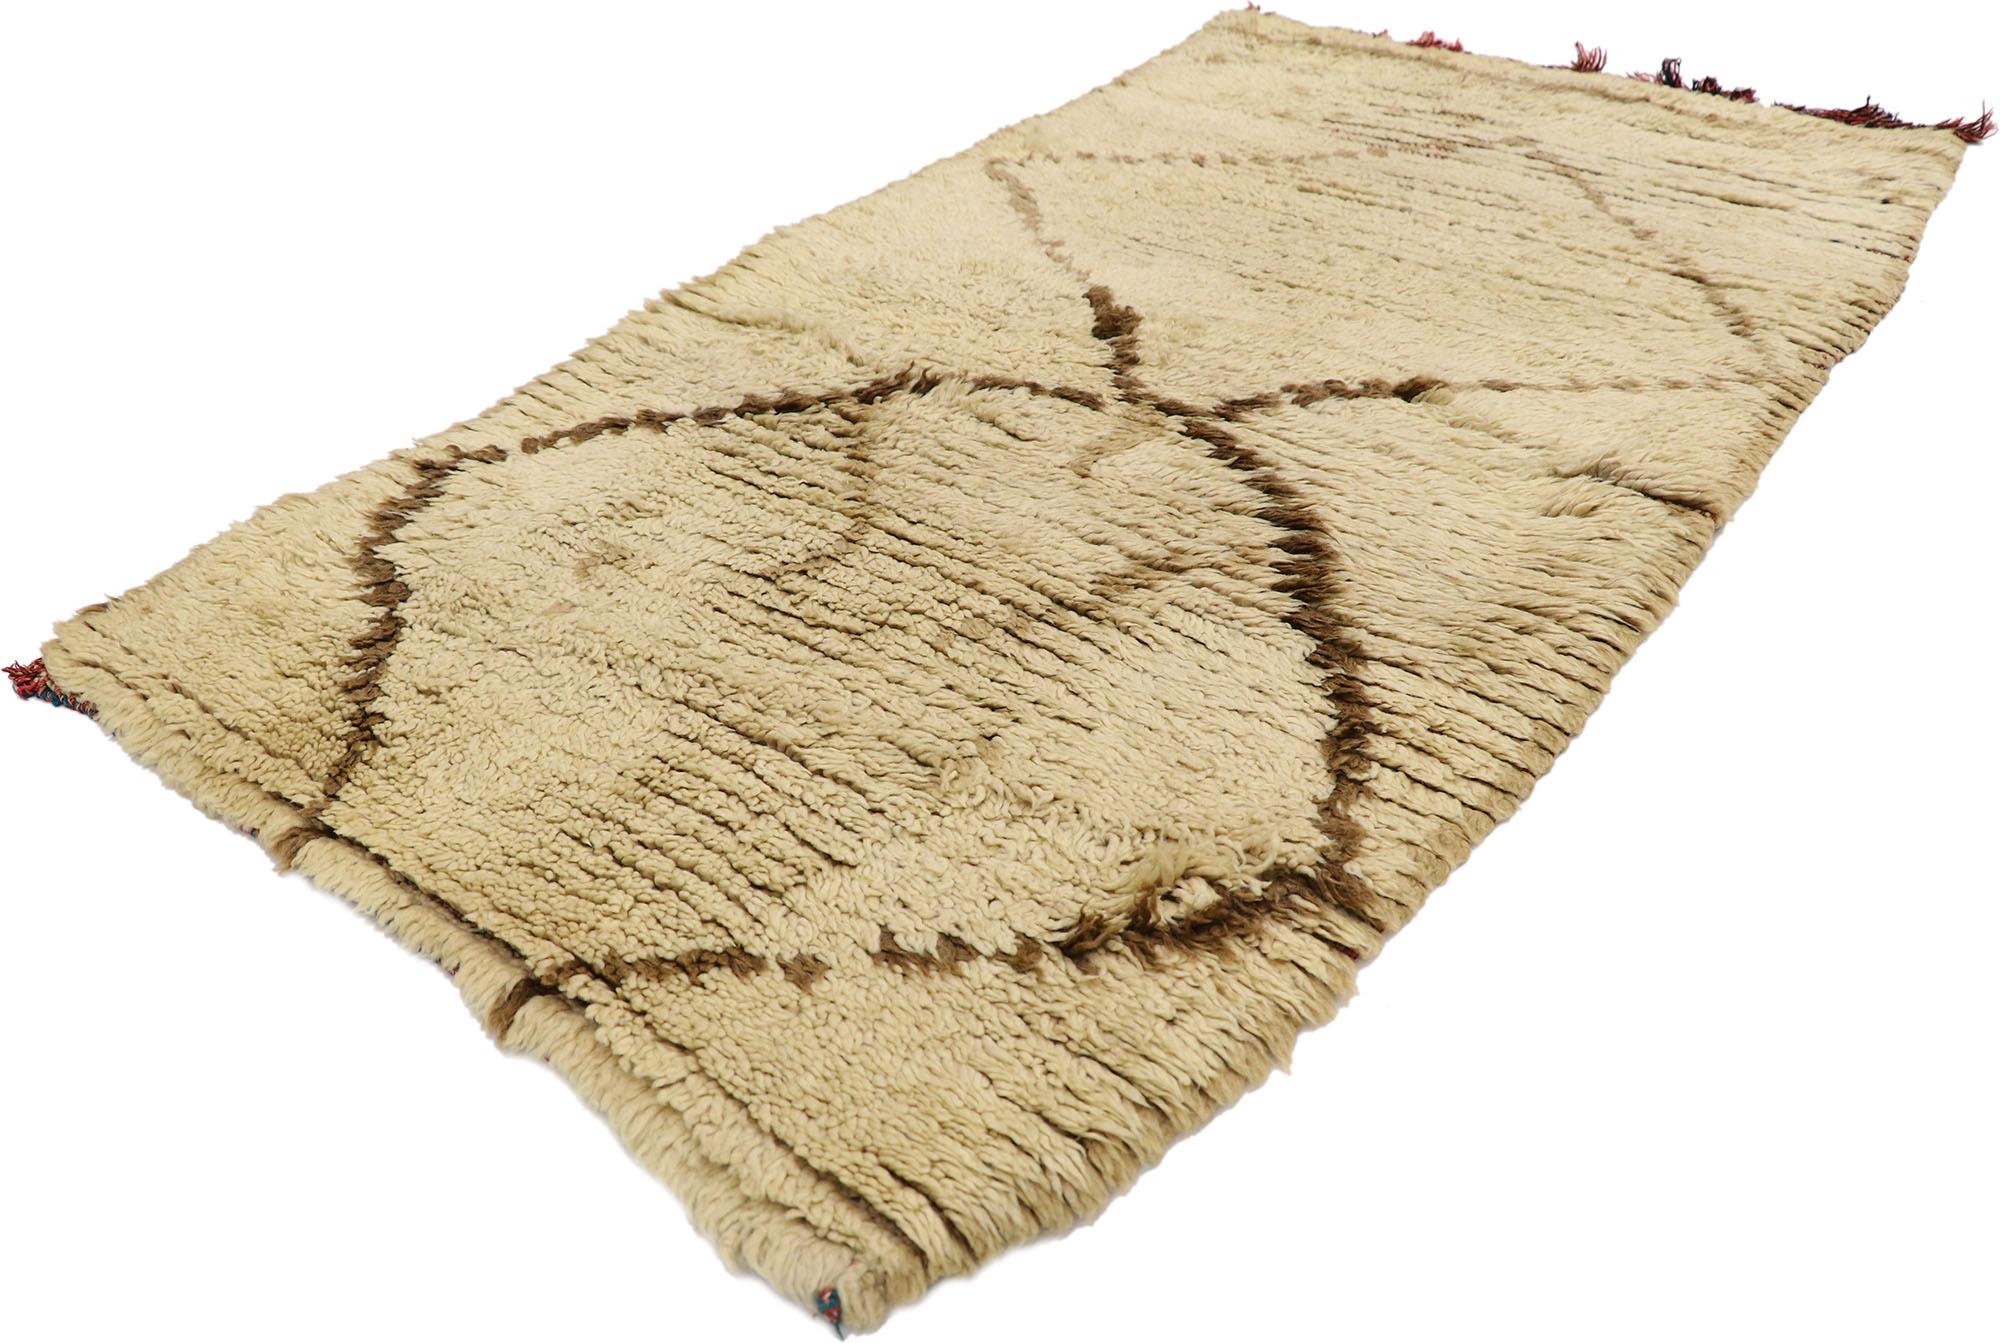 21553 Vintage Berber Moroccan Azilal Rug, 02'06 x 04'10.
Neutral boho chic meets wabi-sabi in this hand knotted vintage Moroccan Azilal rug. The intrinsic diamond design and neutral earth-tone colors woven into this piece work together creating a